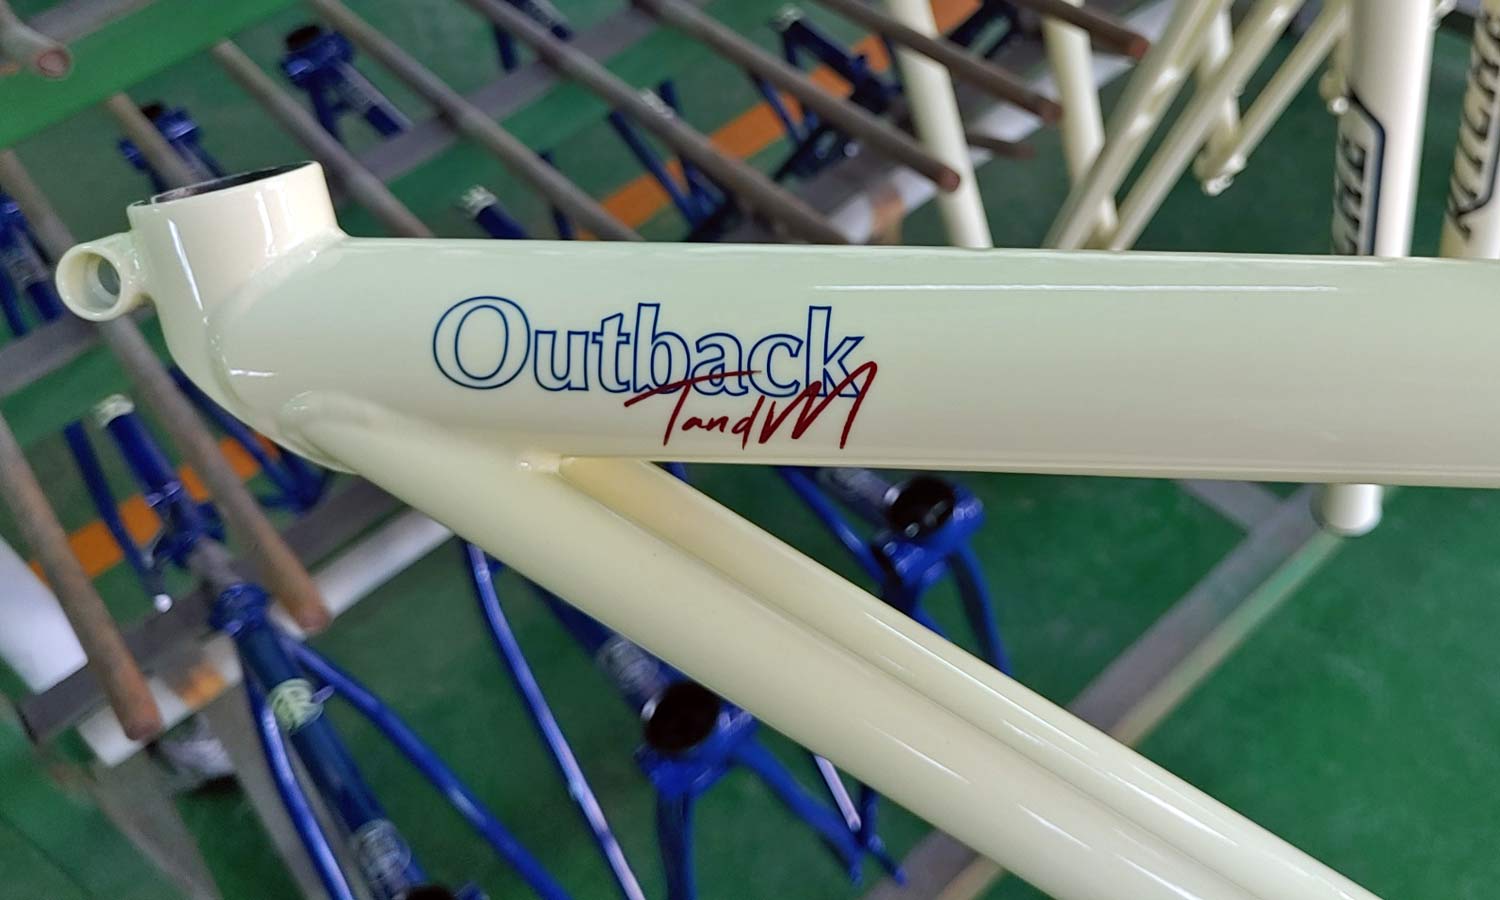 Ritchey Outback TandM Break-Away folding steel travel gravel tandem, factory preview